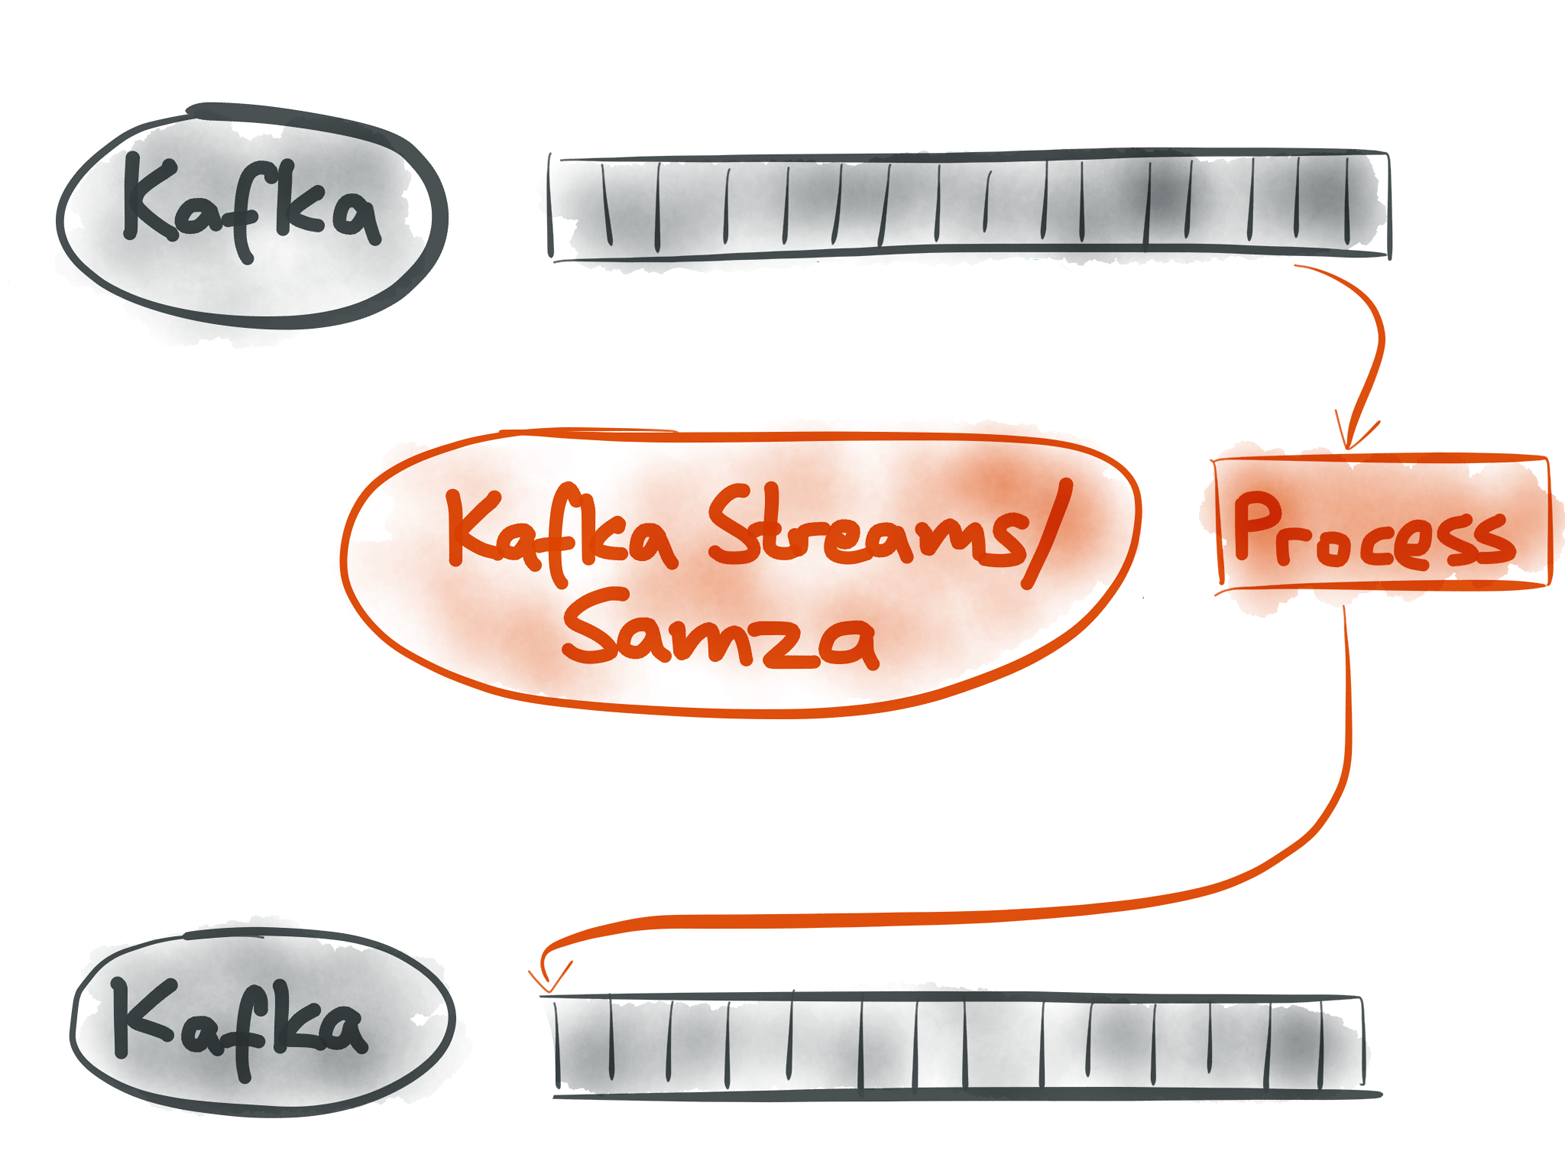 Apache Kafka is a good implementation of event streams, and tools like Kafka Streams or Apache Samza can be used to process those streams.